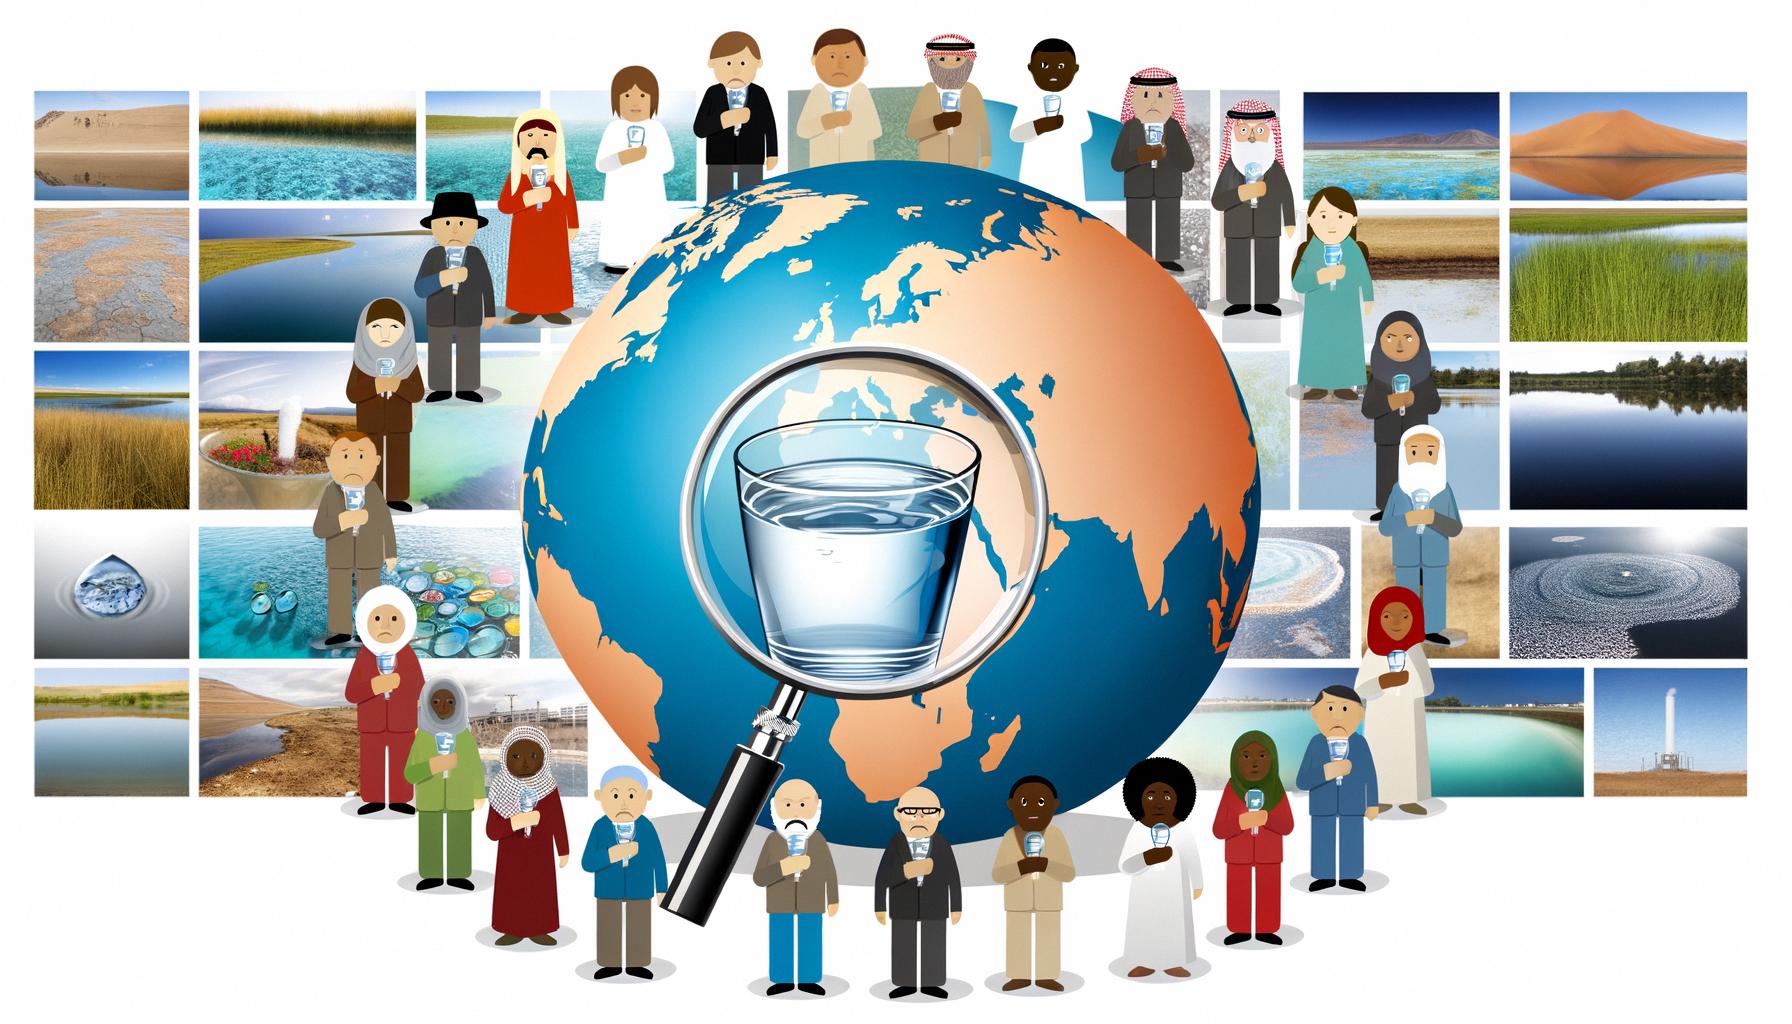 Increasing concerns over water contamination affecting health globally